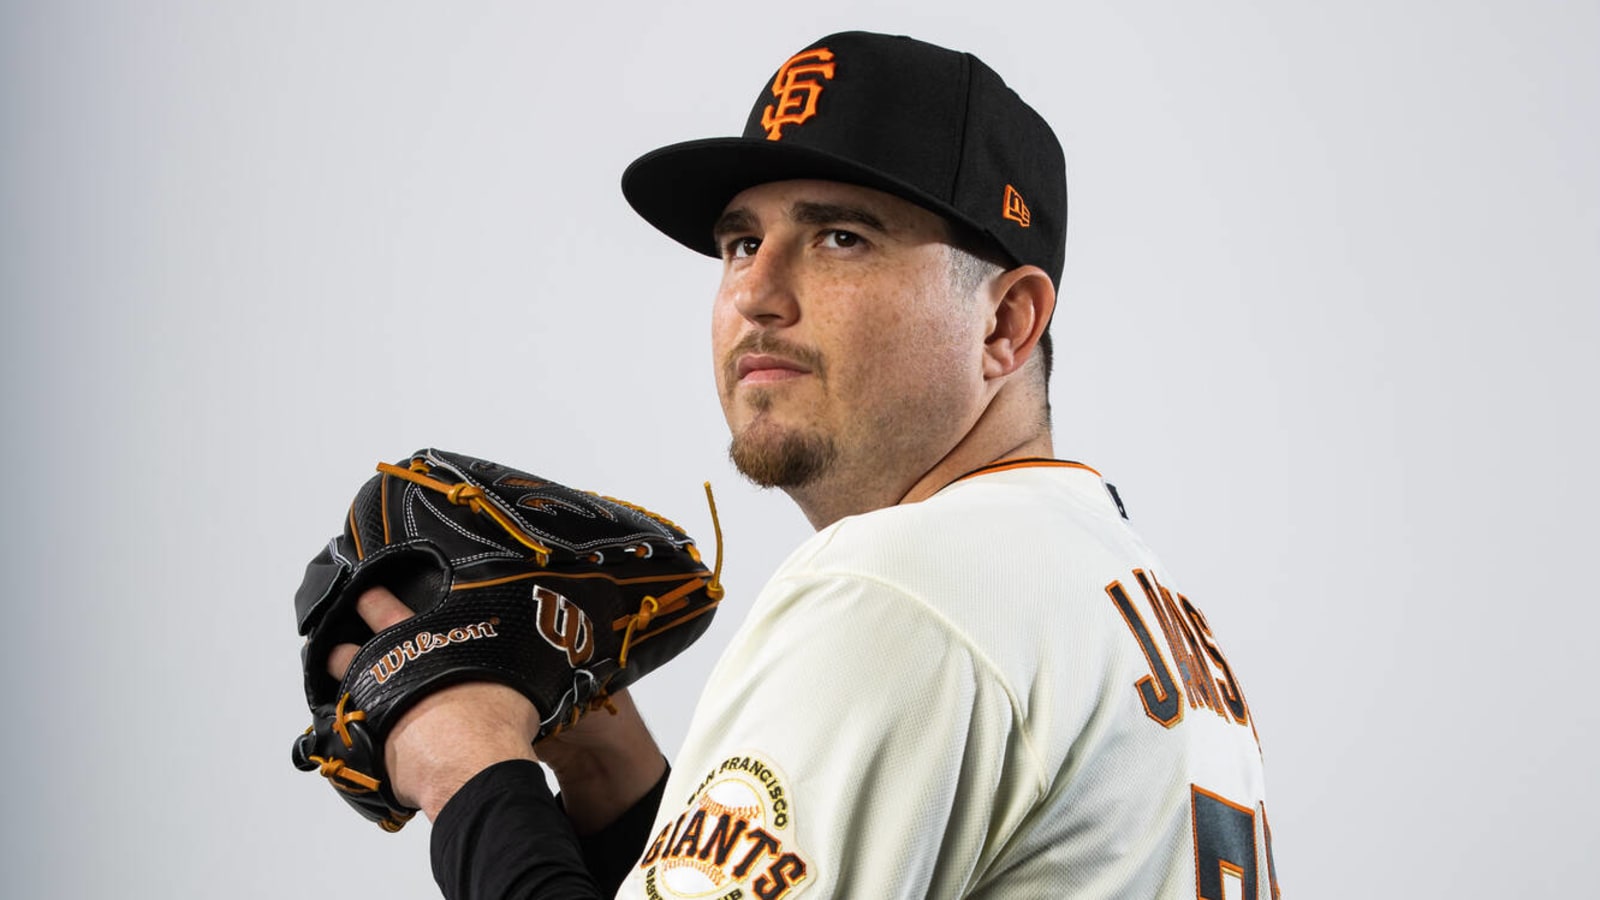 Giants righty to return, make first appearance since 2021 season